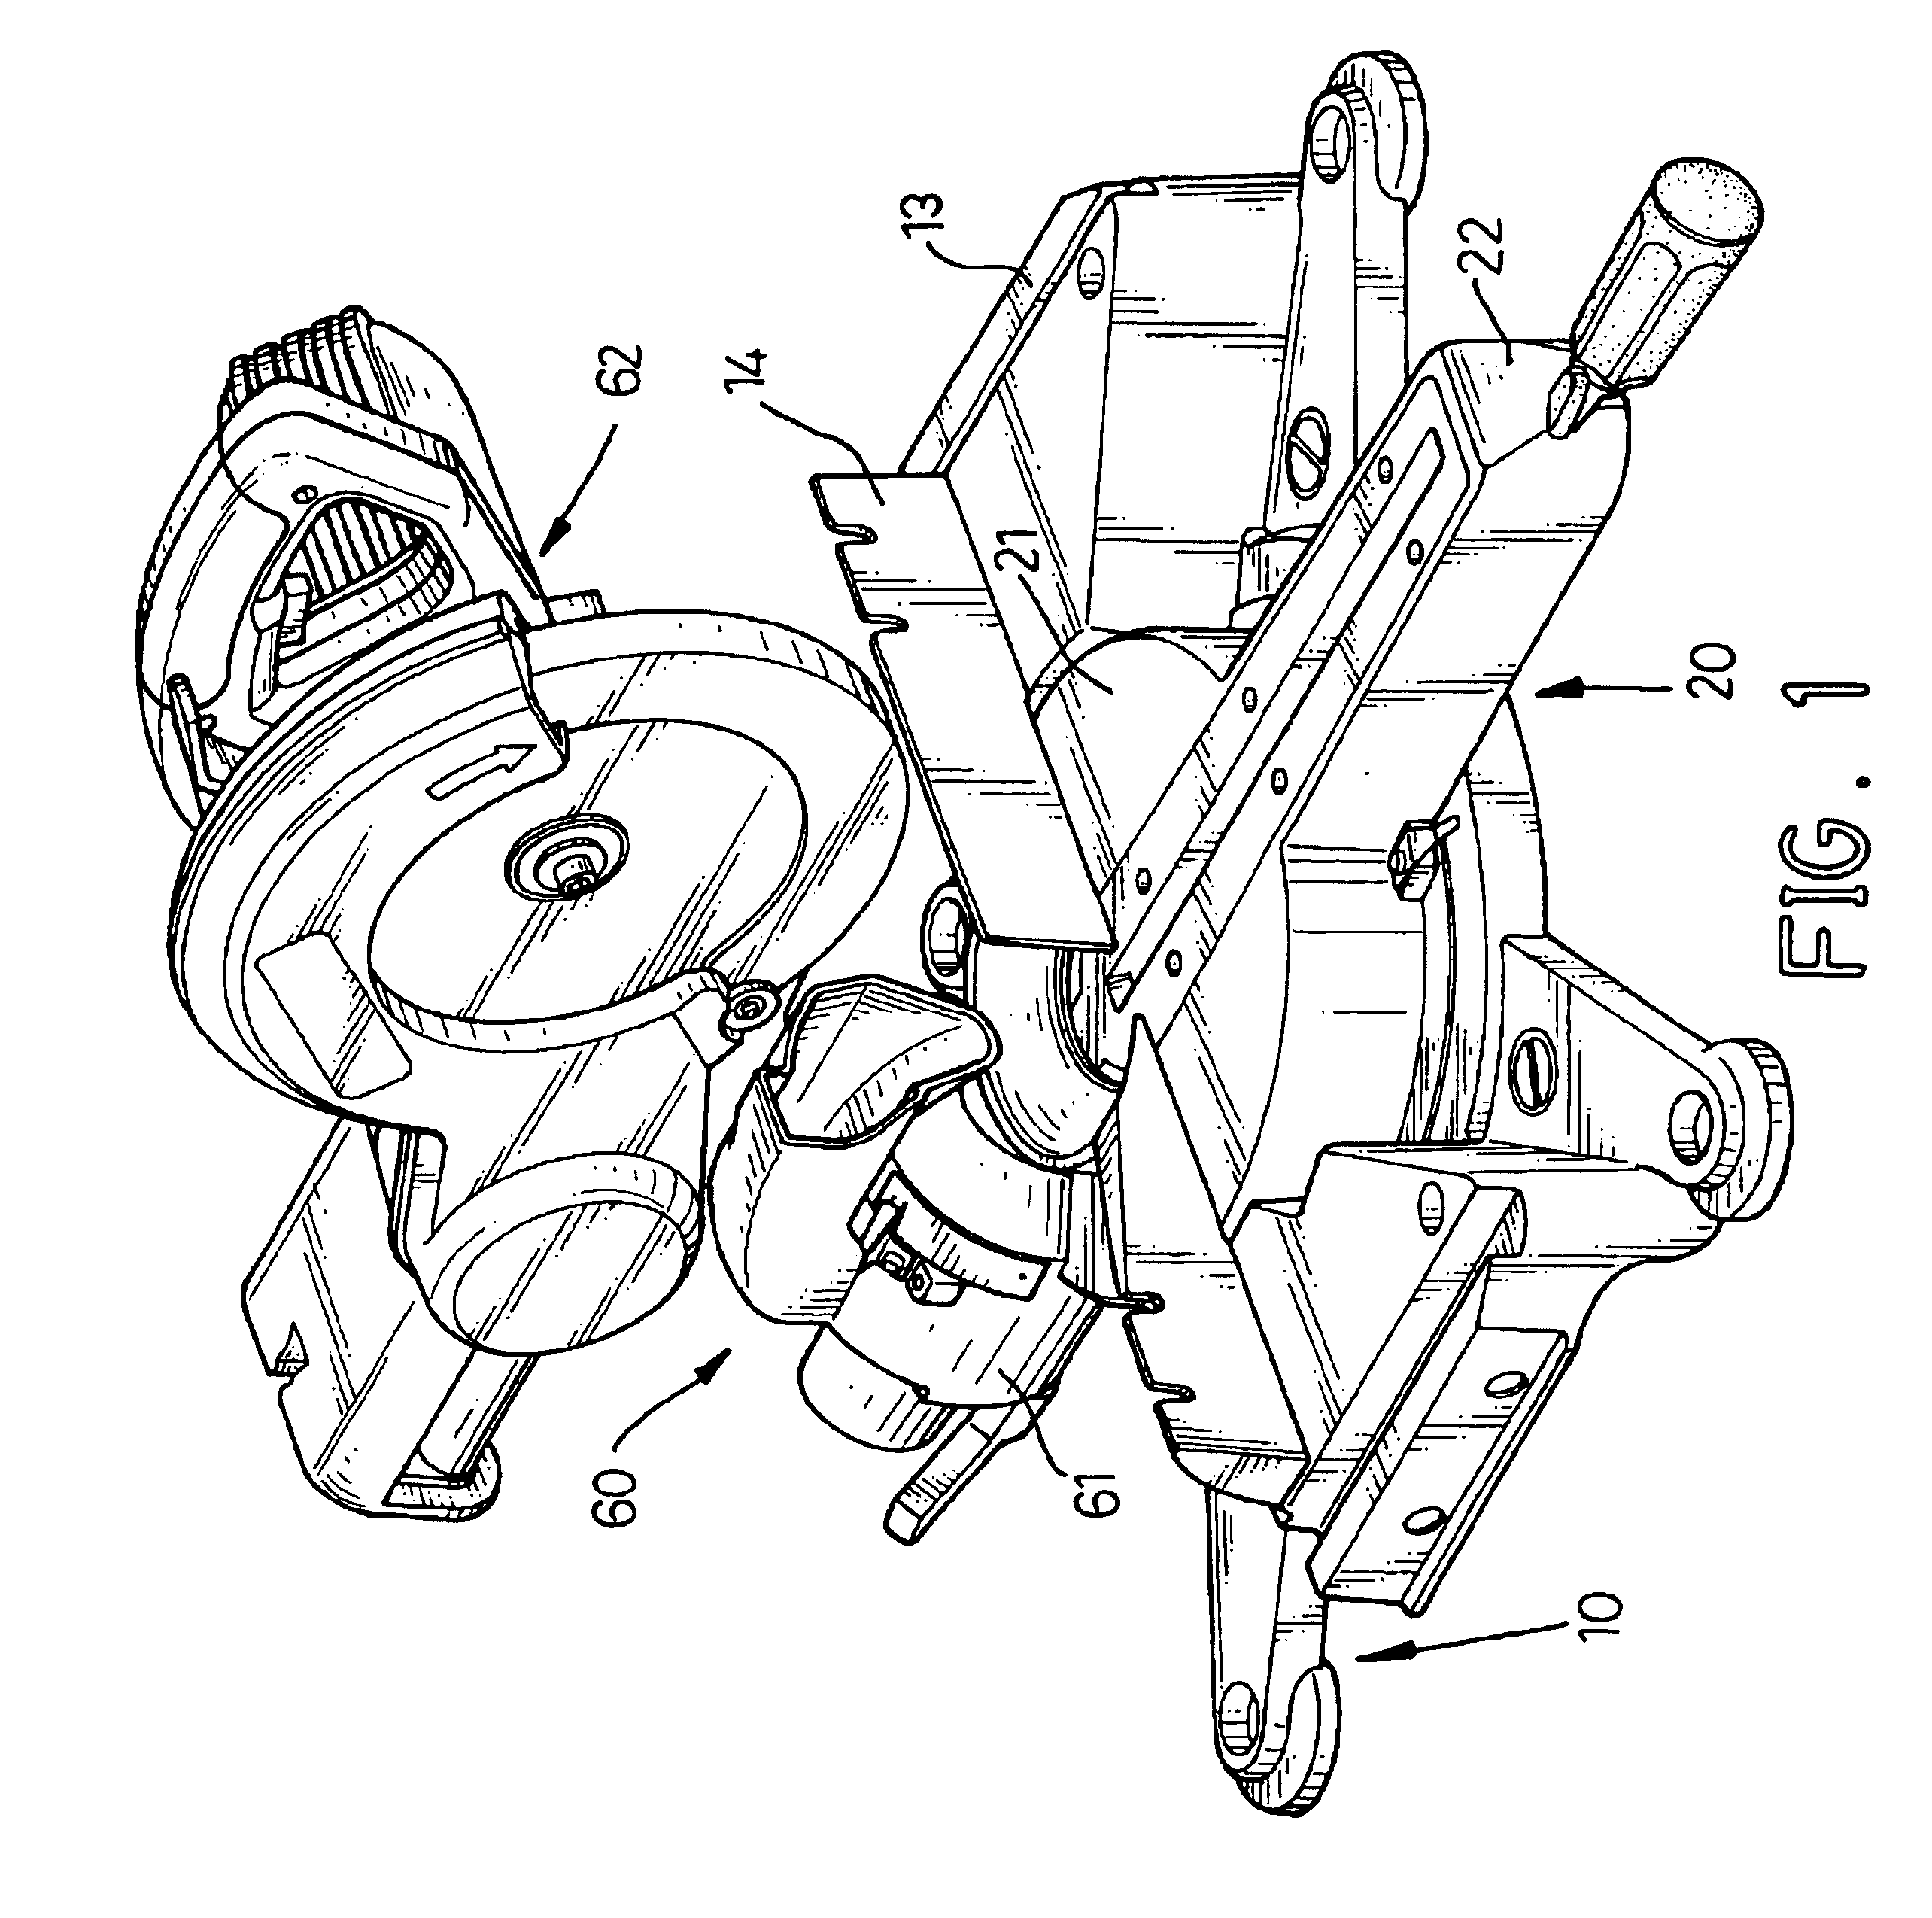 Adjustment device for a compound miter saw